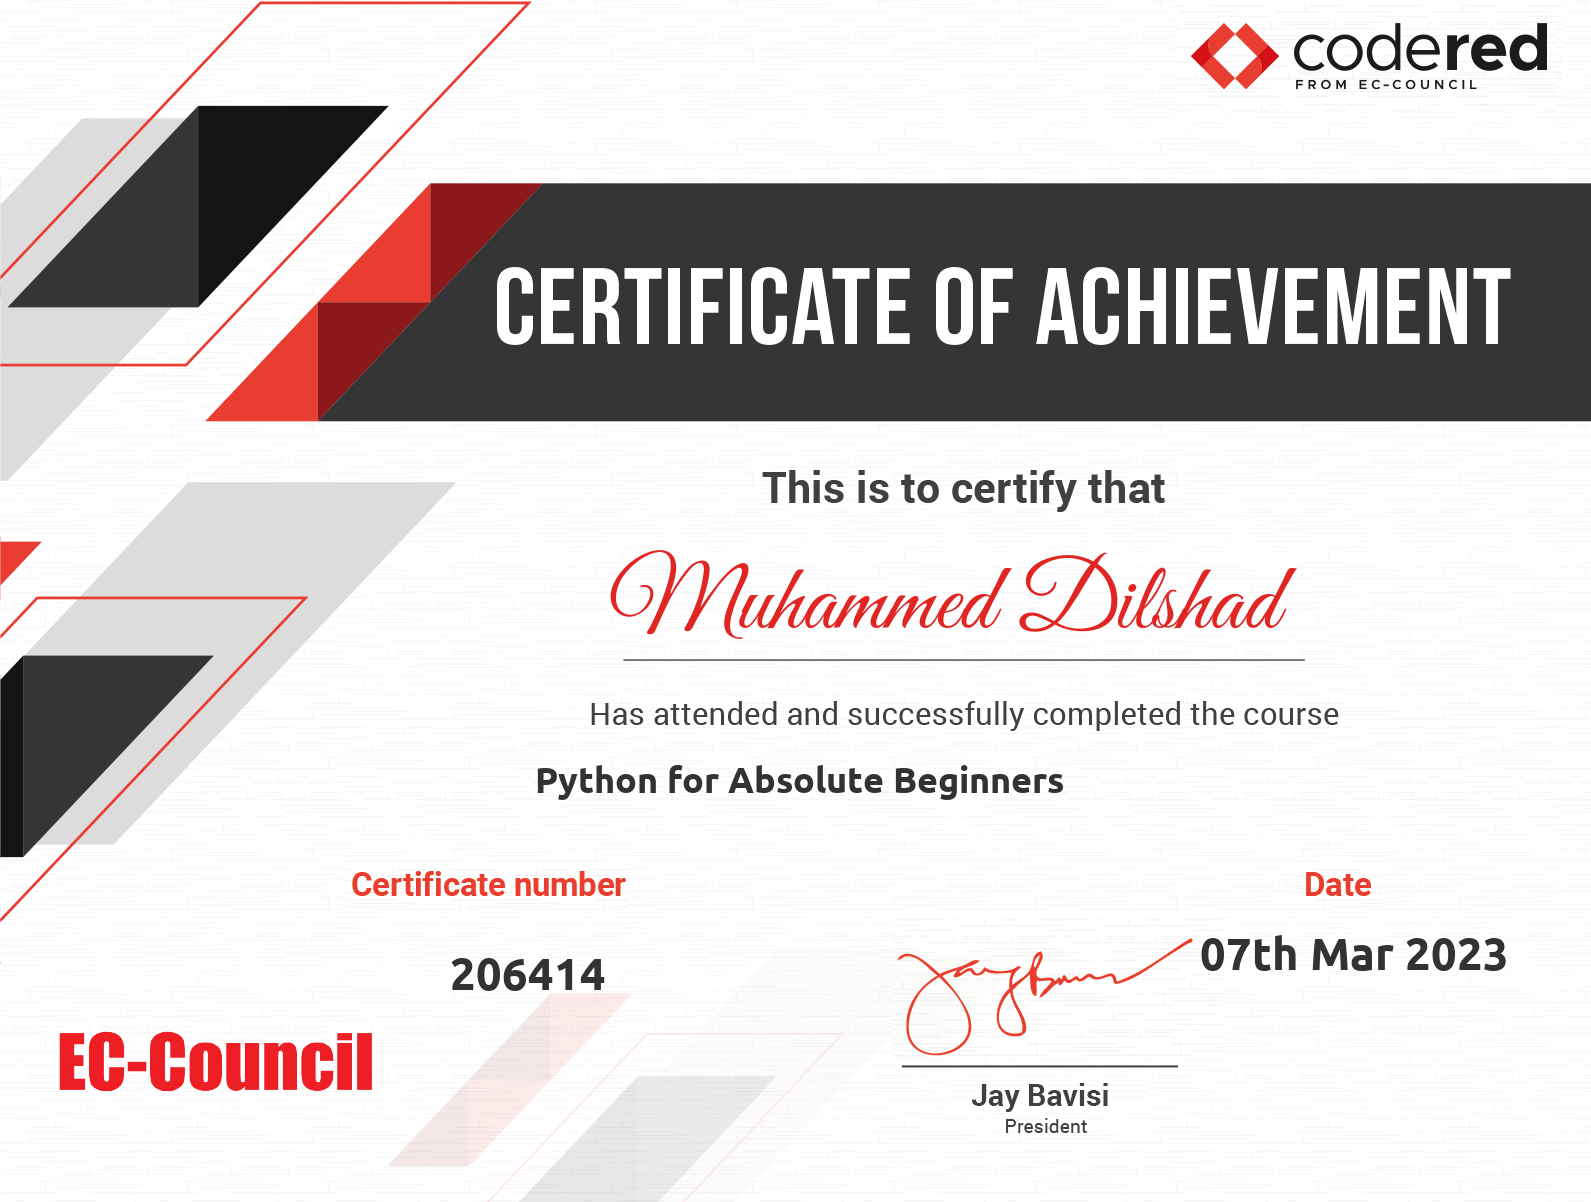 couNciL

> CERTIFICATE OF ACHIEVEMENT

This is to certify that

# O)Nlitemmed Dilstad

Has attended and successfully completed the course
Python for Absolute Beginners
Certificate number Date

206414 SE Mar 2023

Jay Bavisi

President